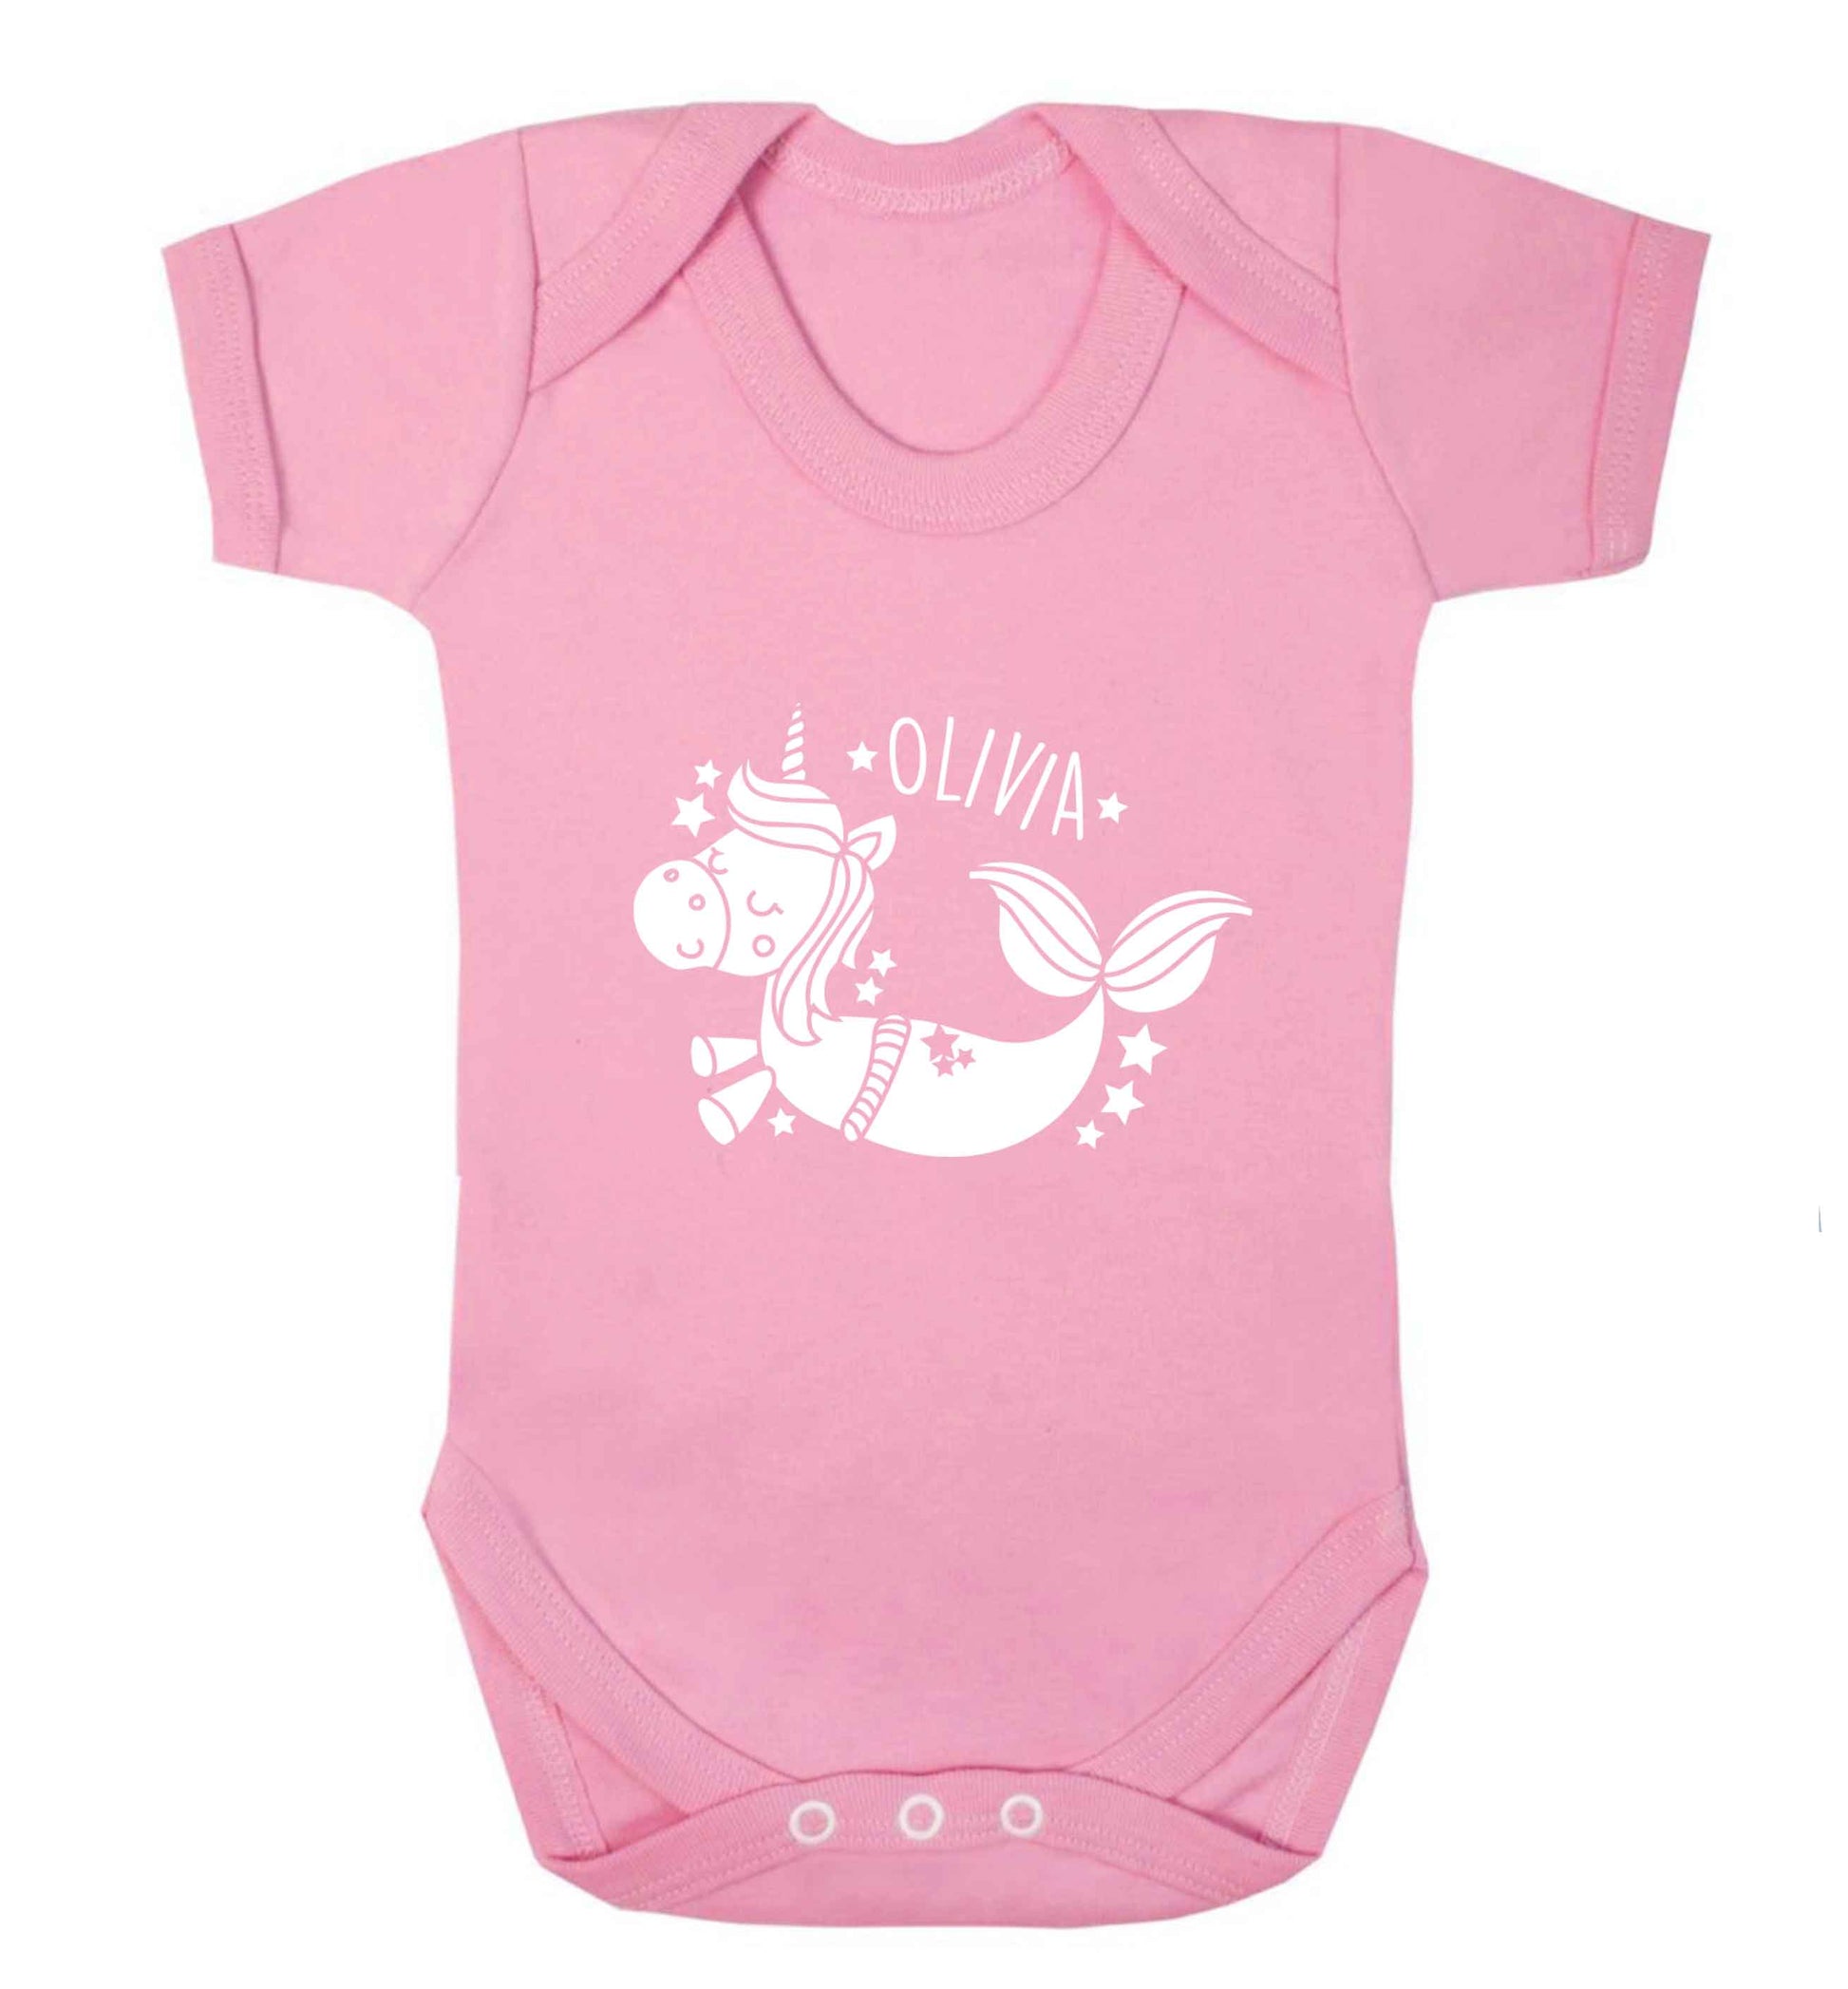 Unicorn mermaid - any name baby vest pale pink 18-24 months